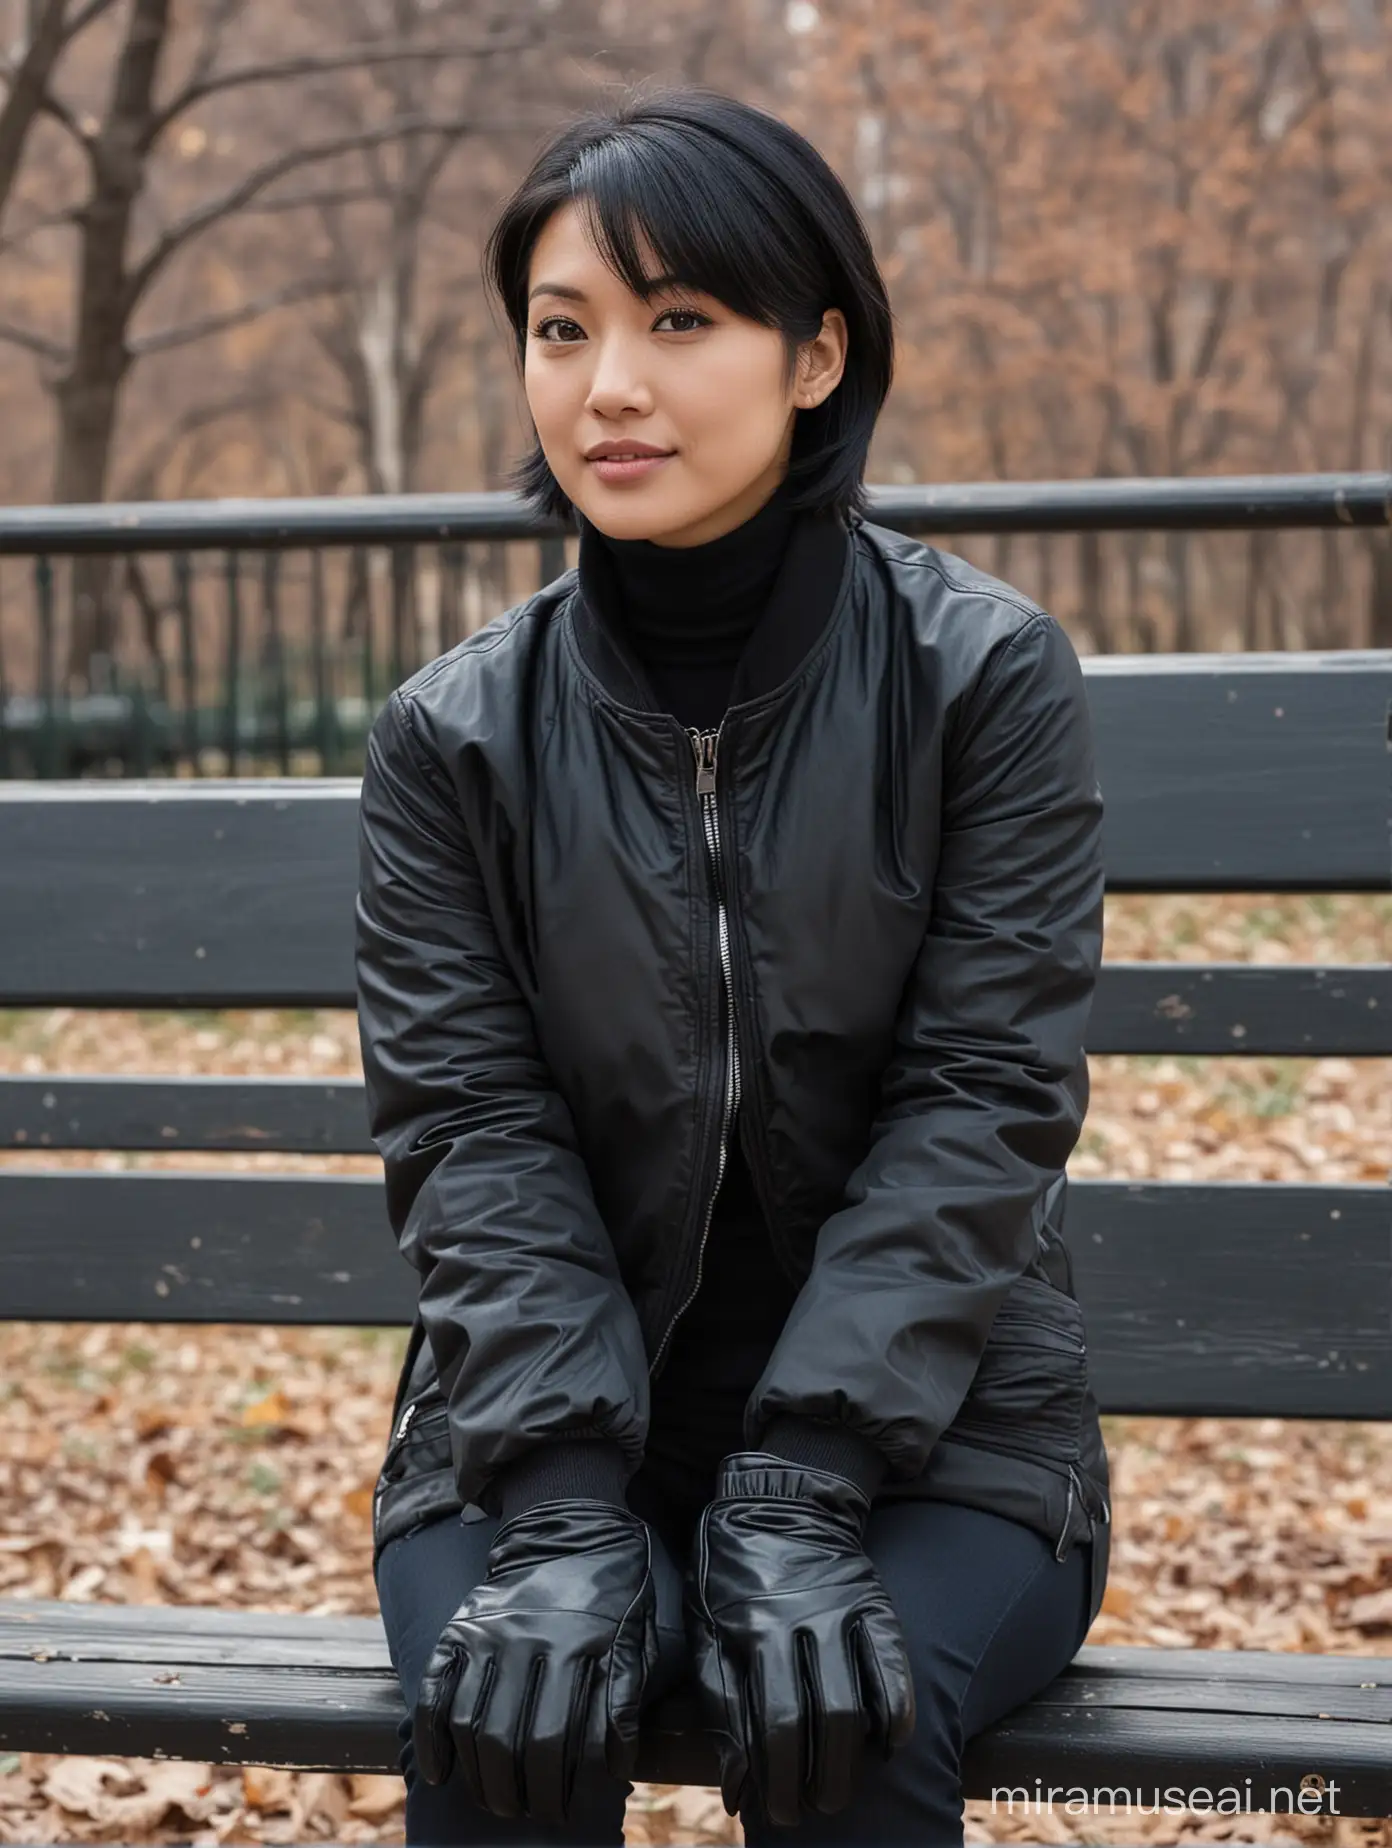 AsianAmerican Woman in Winter Fashion Sitting on Bench in New York Park